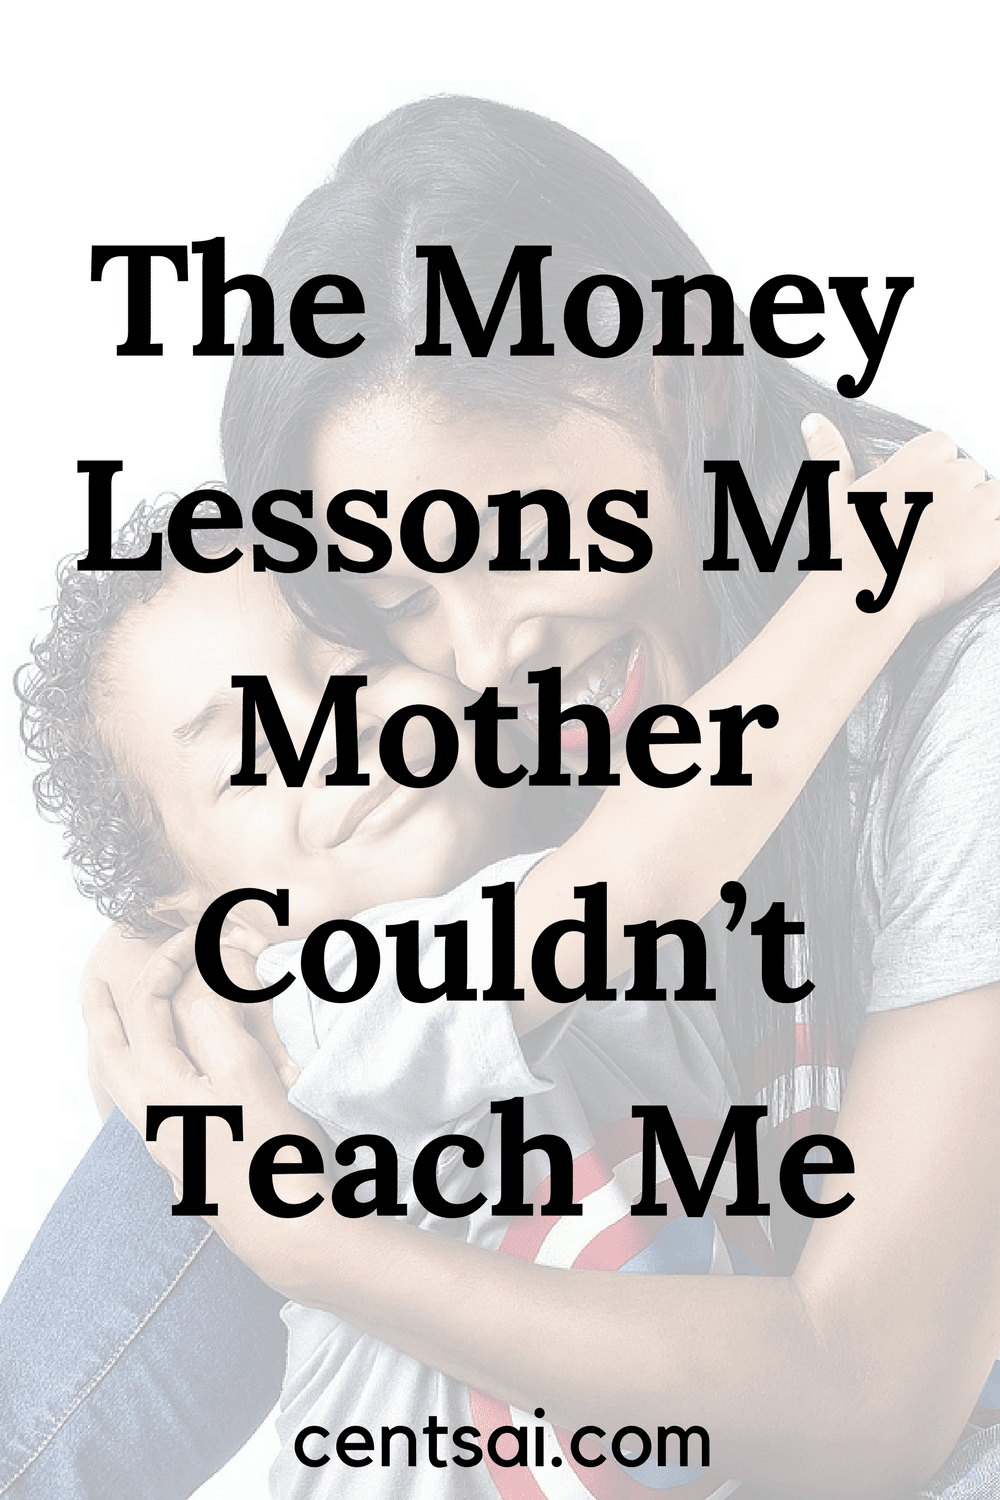 The Money Lessons My Mother Couldn’t Teach Me. Our money attitude is shaped by our childhood experiences, and family plays a big part in it by giving us money lessons.